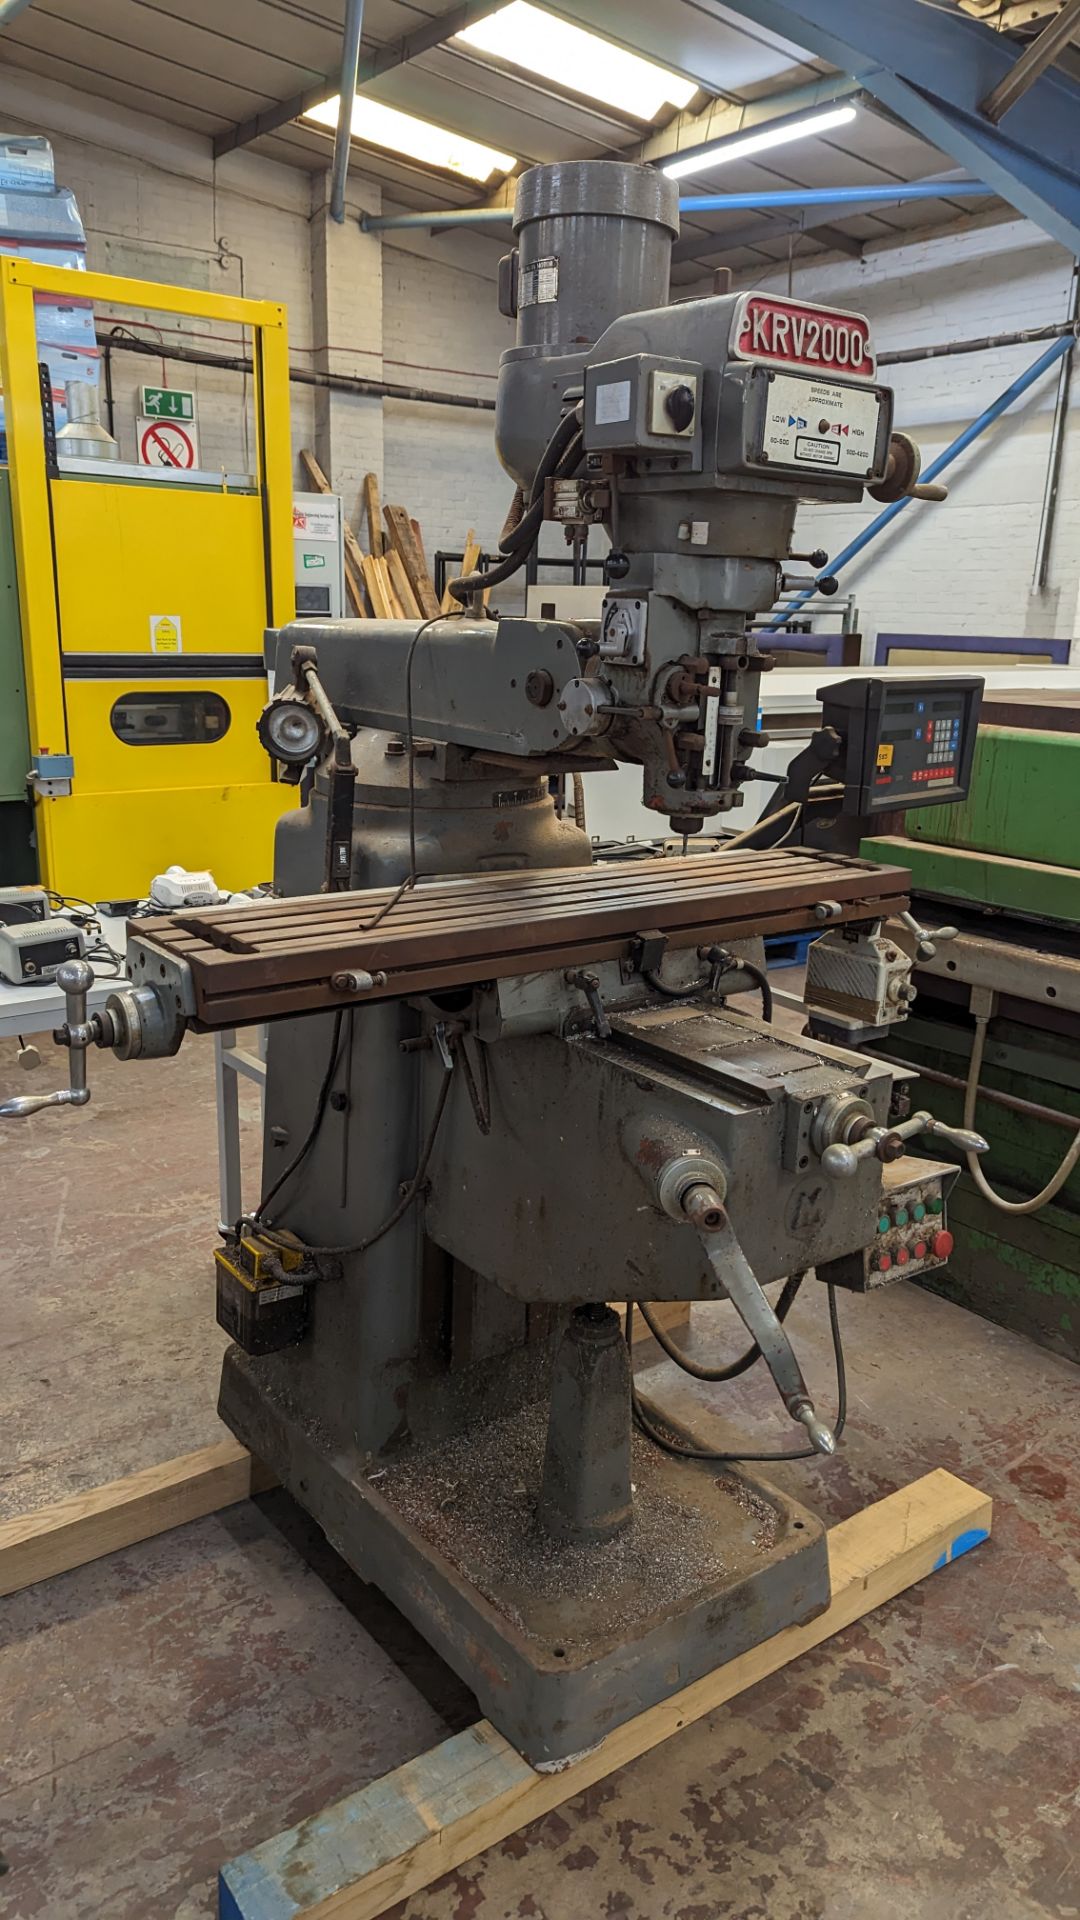 King Rich KRV2000 turret mill with Newall DP7 controls